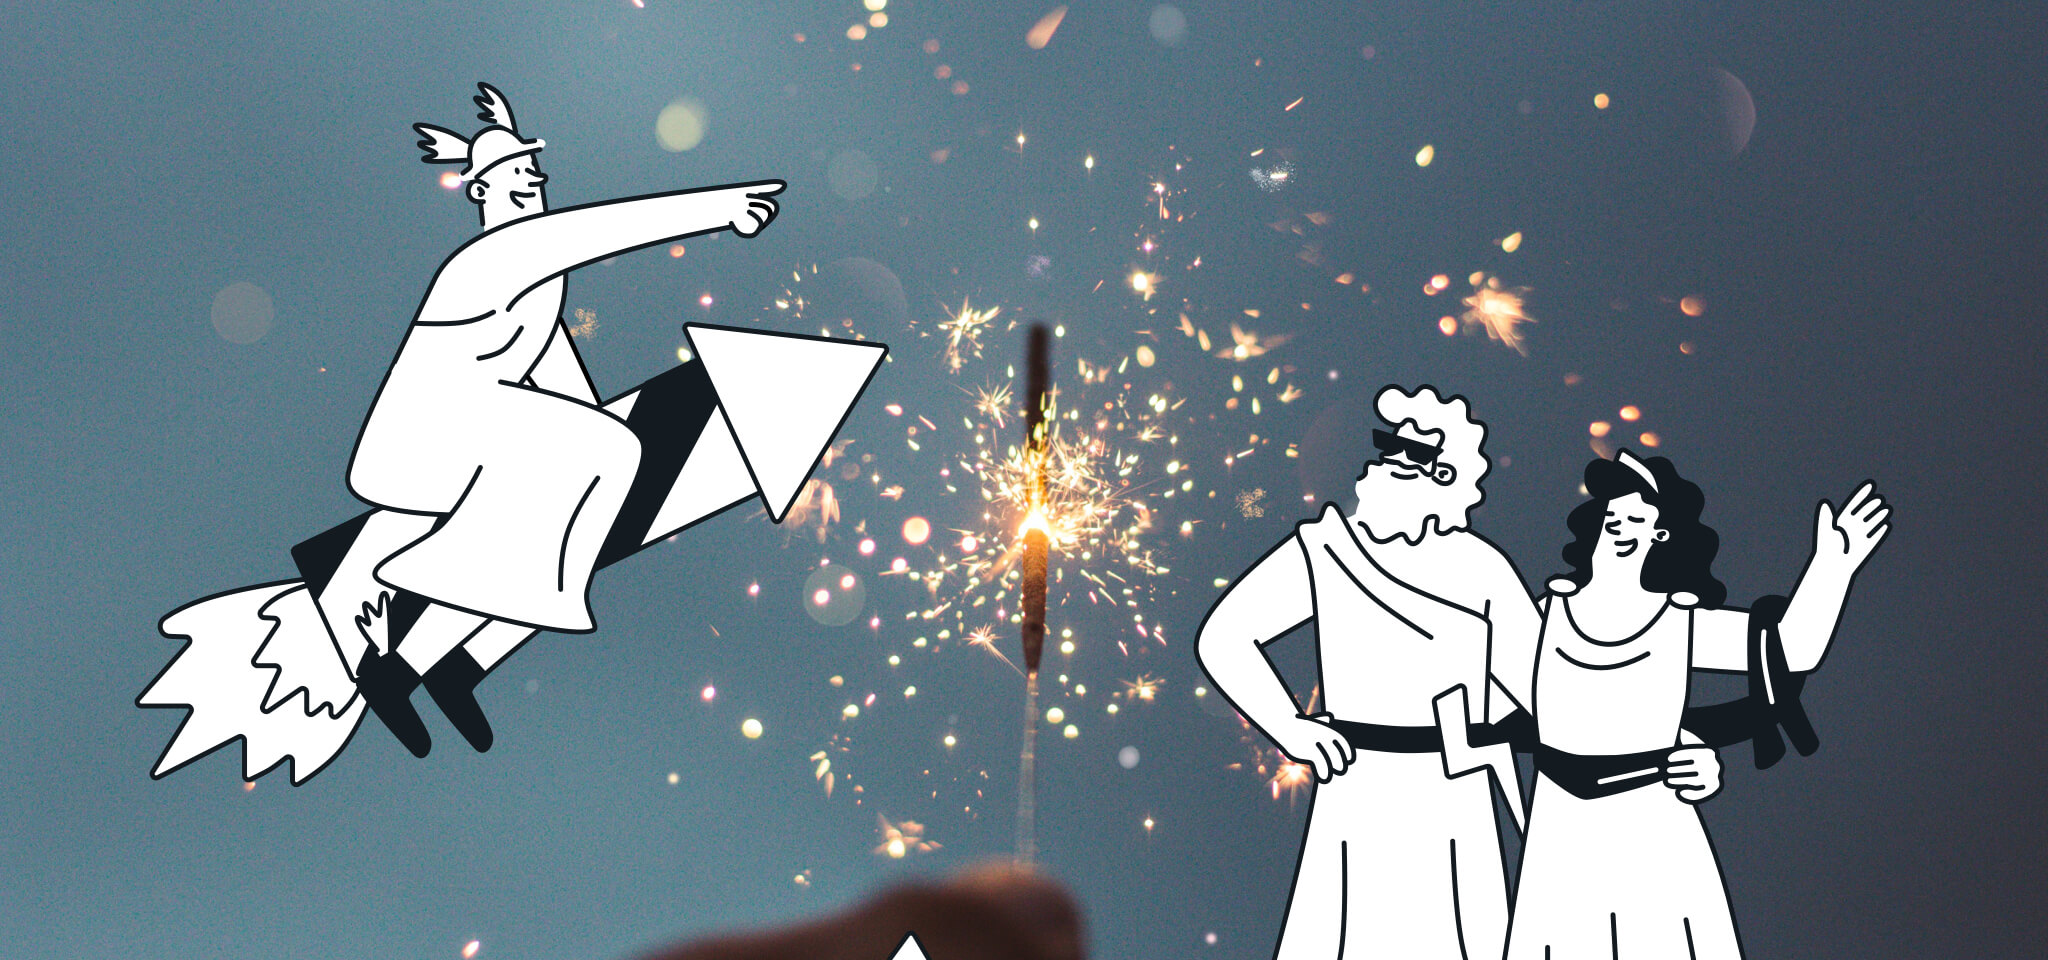 Hermes, a God, and a Goddess celebrate with fireworks in front of a firecracker